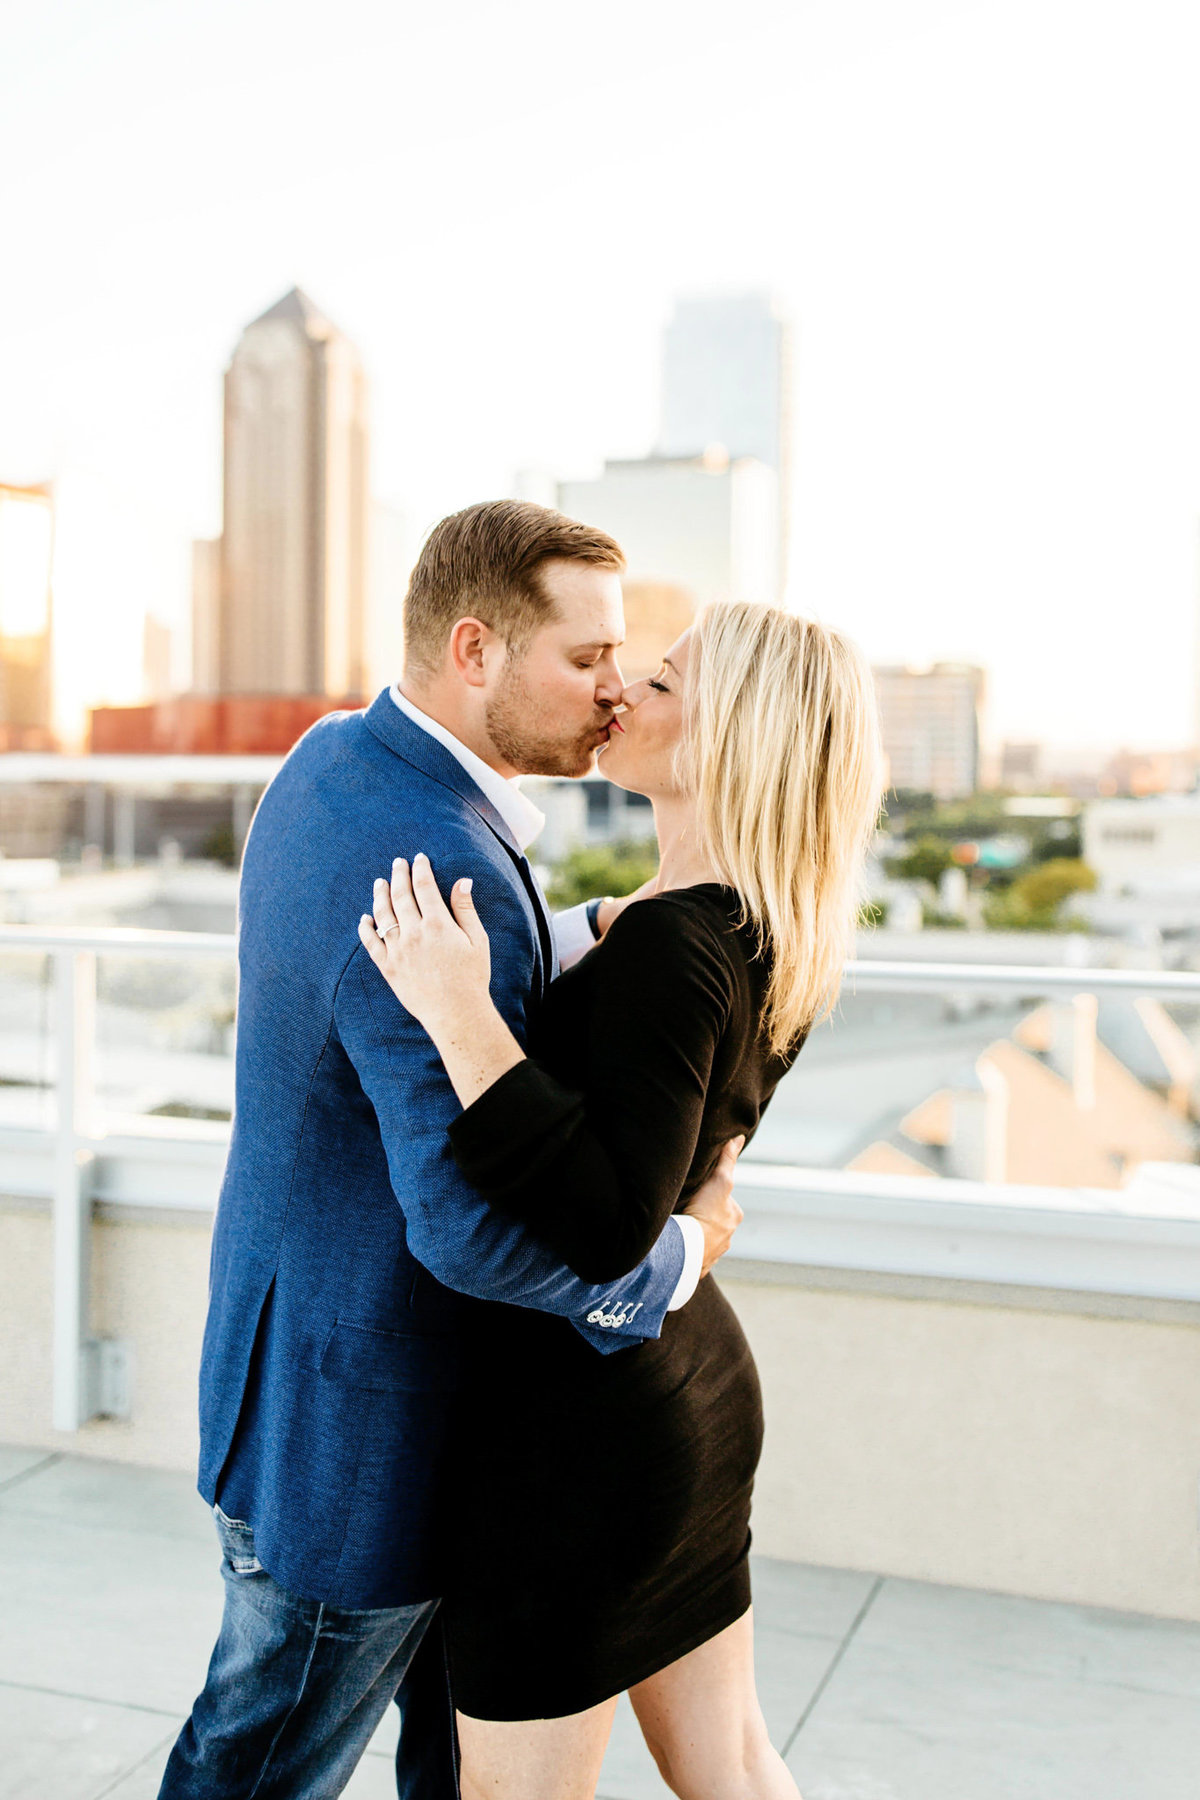 Eric & Megan - Downtown Dallas Rooftop Proposal & Engagement Session-93